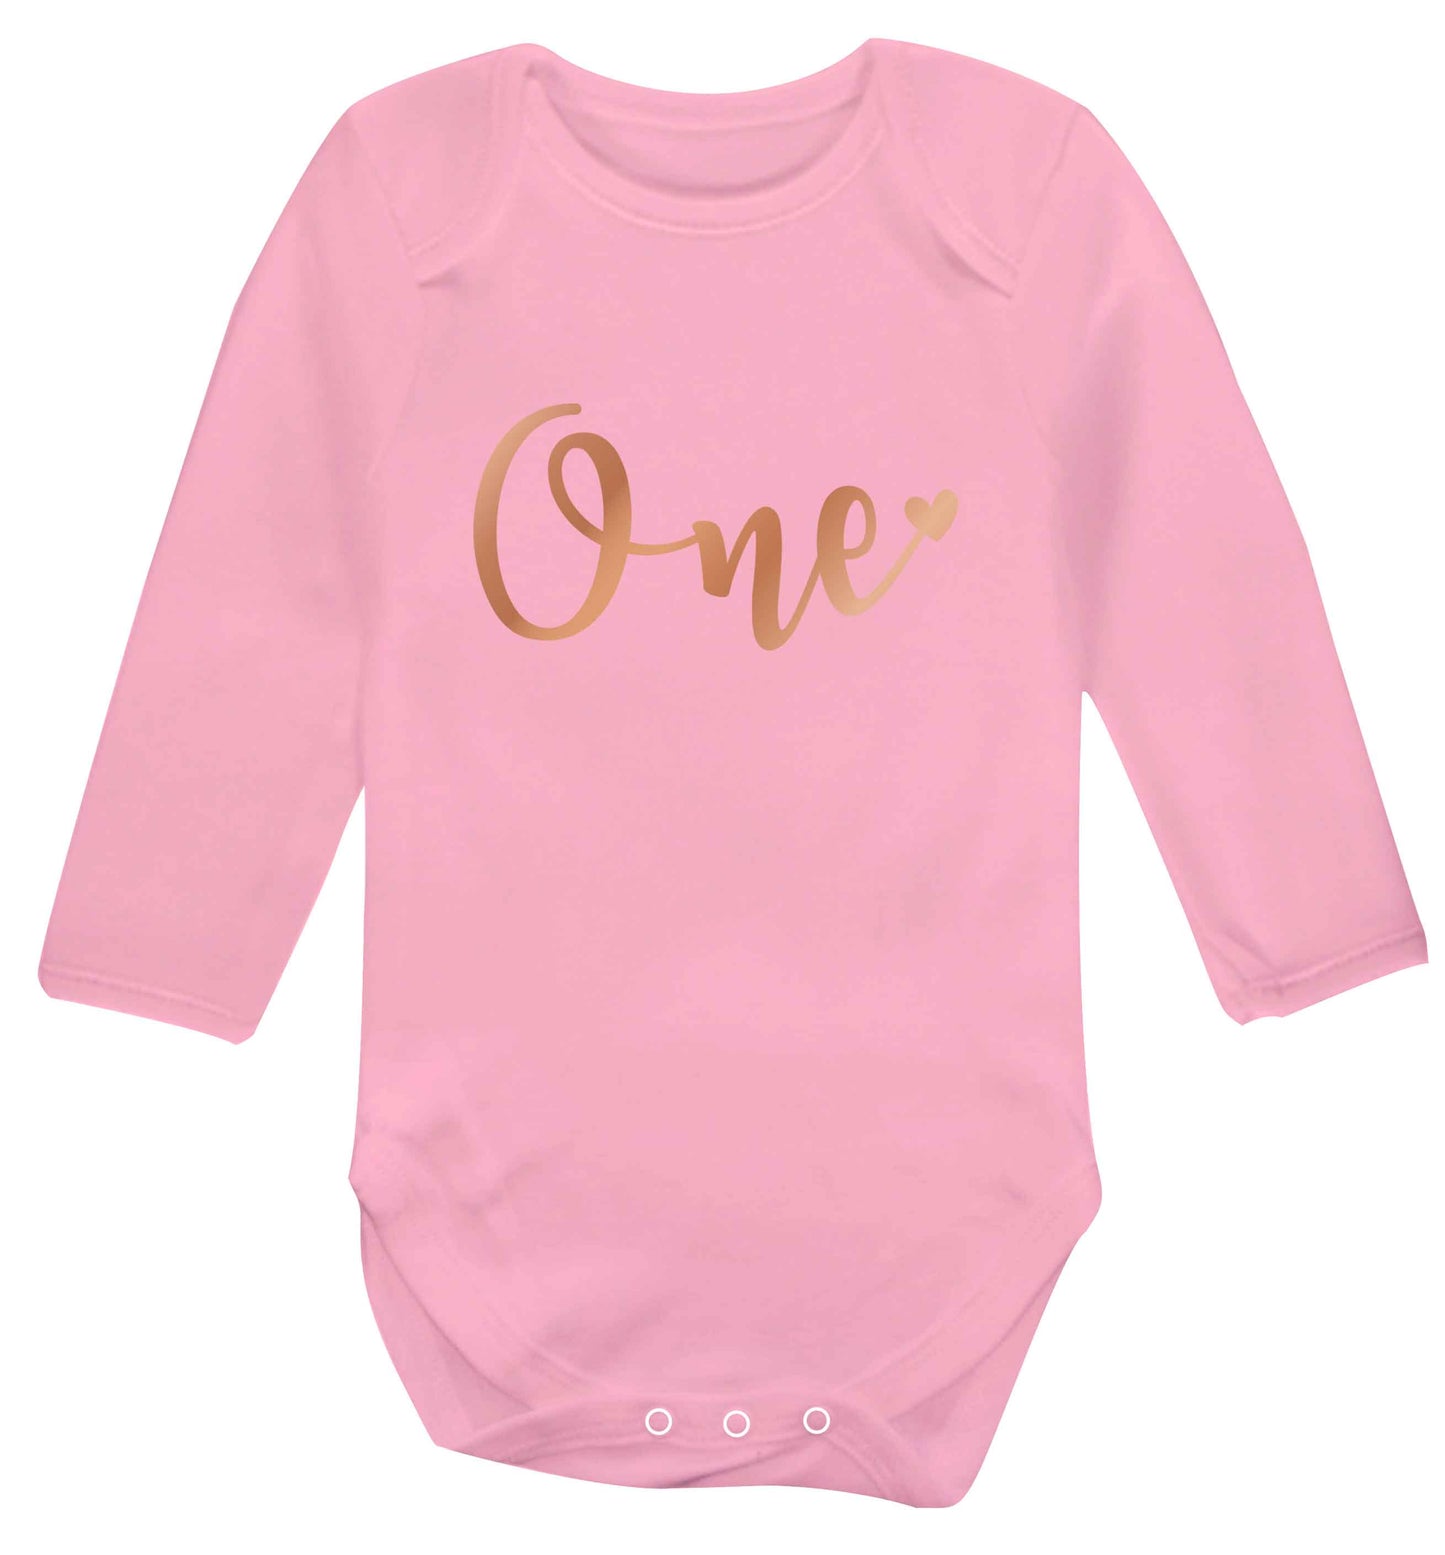 Rose Gold One baby vest long sleeved pale pink 6-12 months